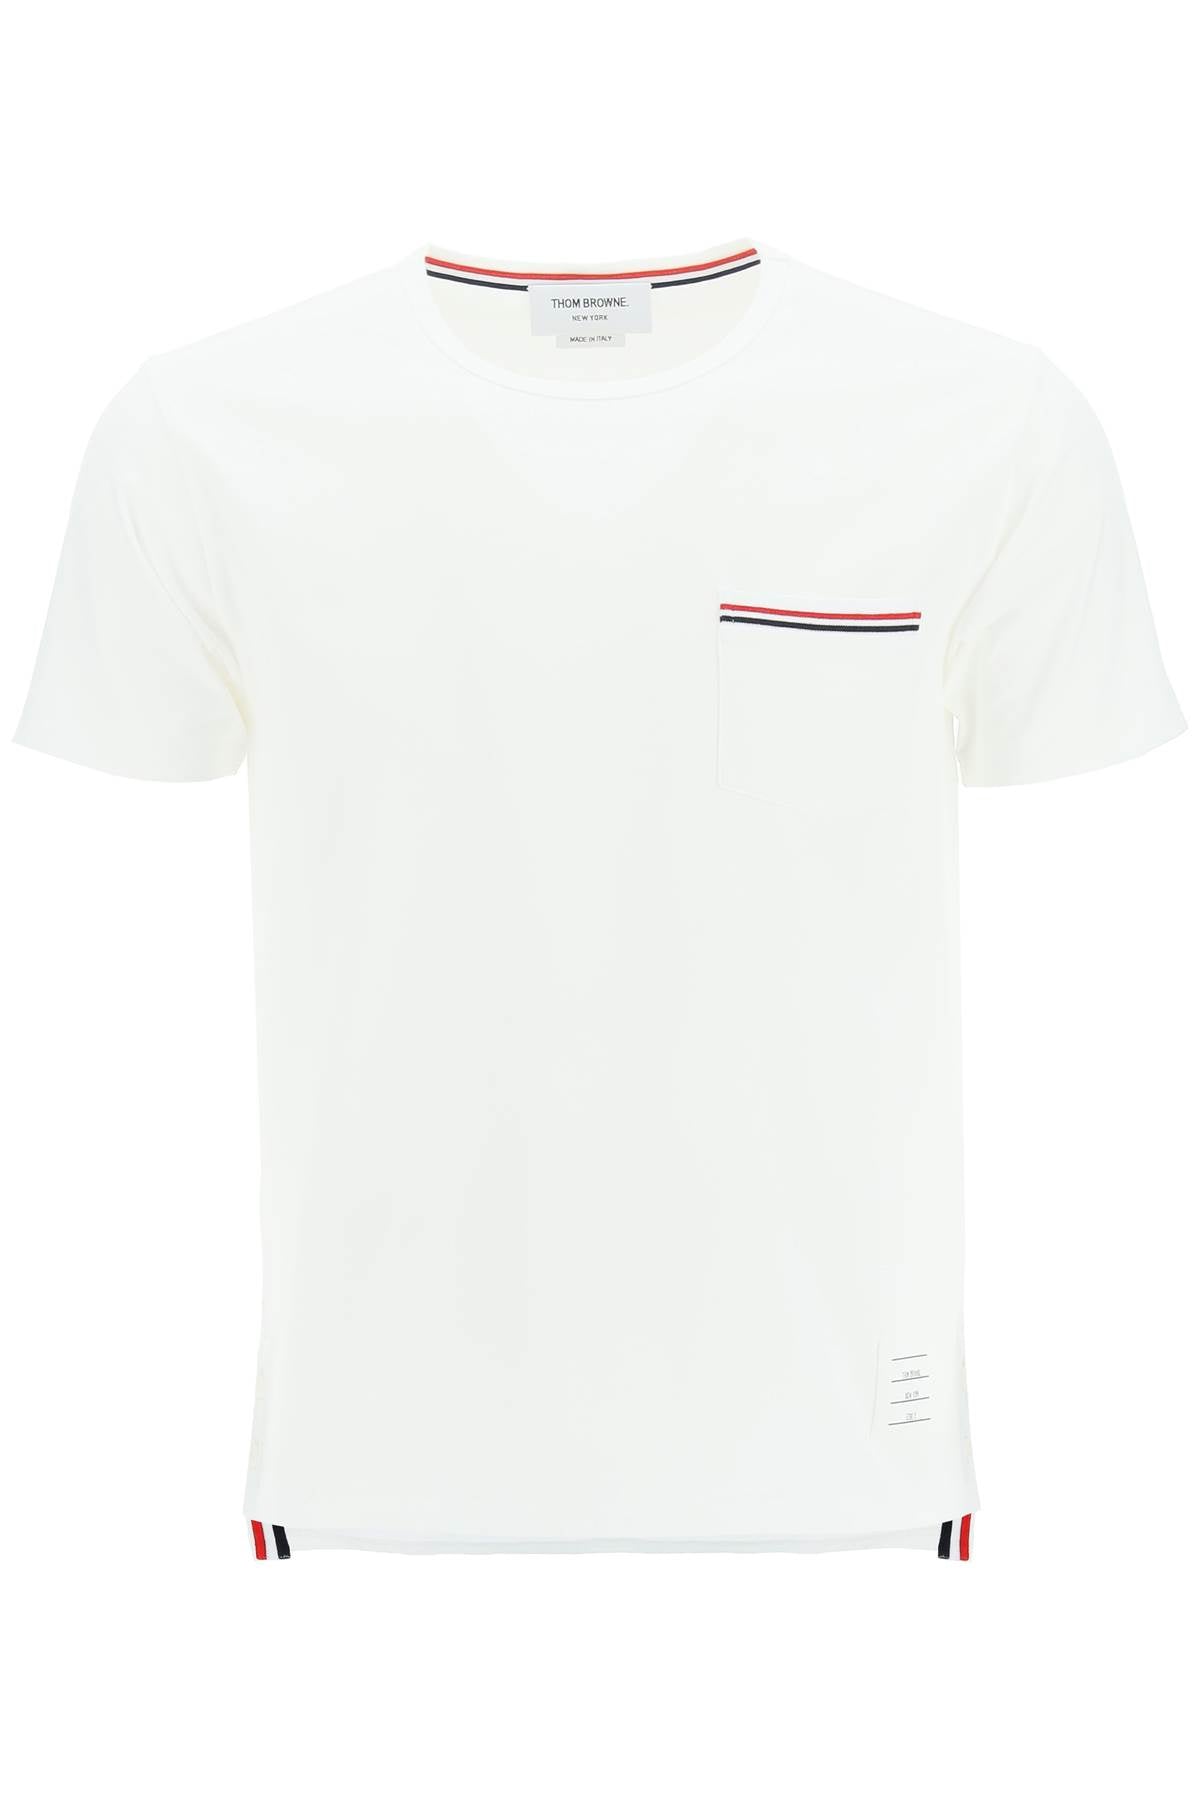 Thom browne t-shirt with tricolor pocket-0